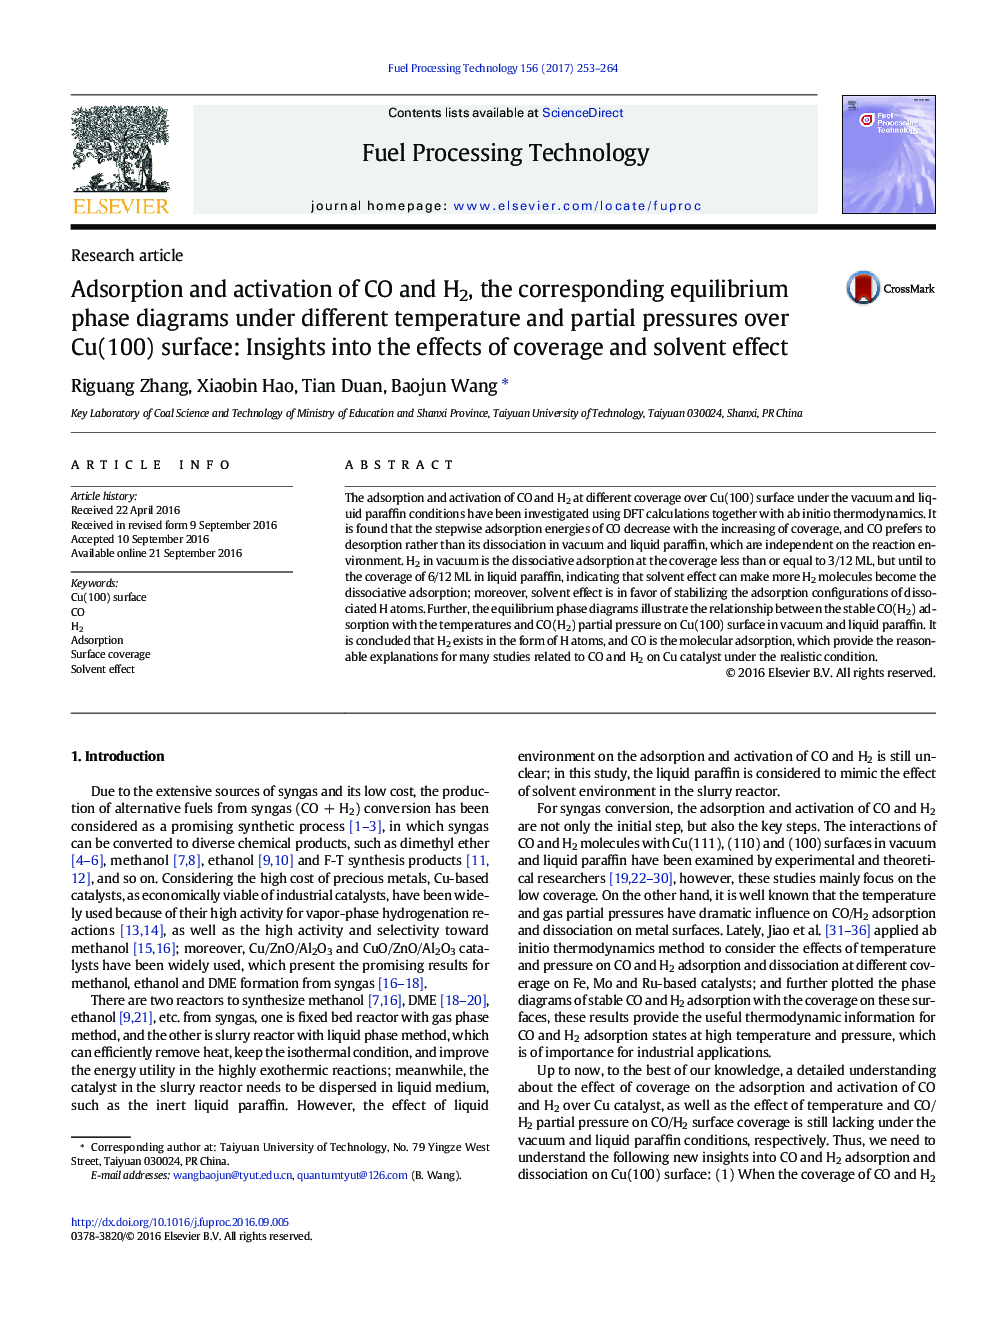 Adsorption and activation of CO and H2, the corresponding equilibrium phase diagrams under different temperature and partial pressures over Cu(100) surface: Insights into the effects of coverage and solvent effect